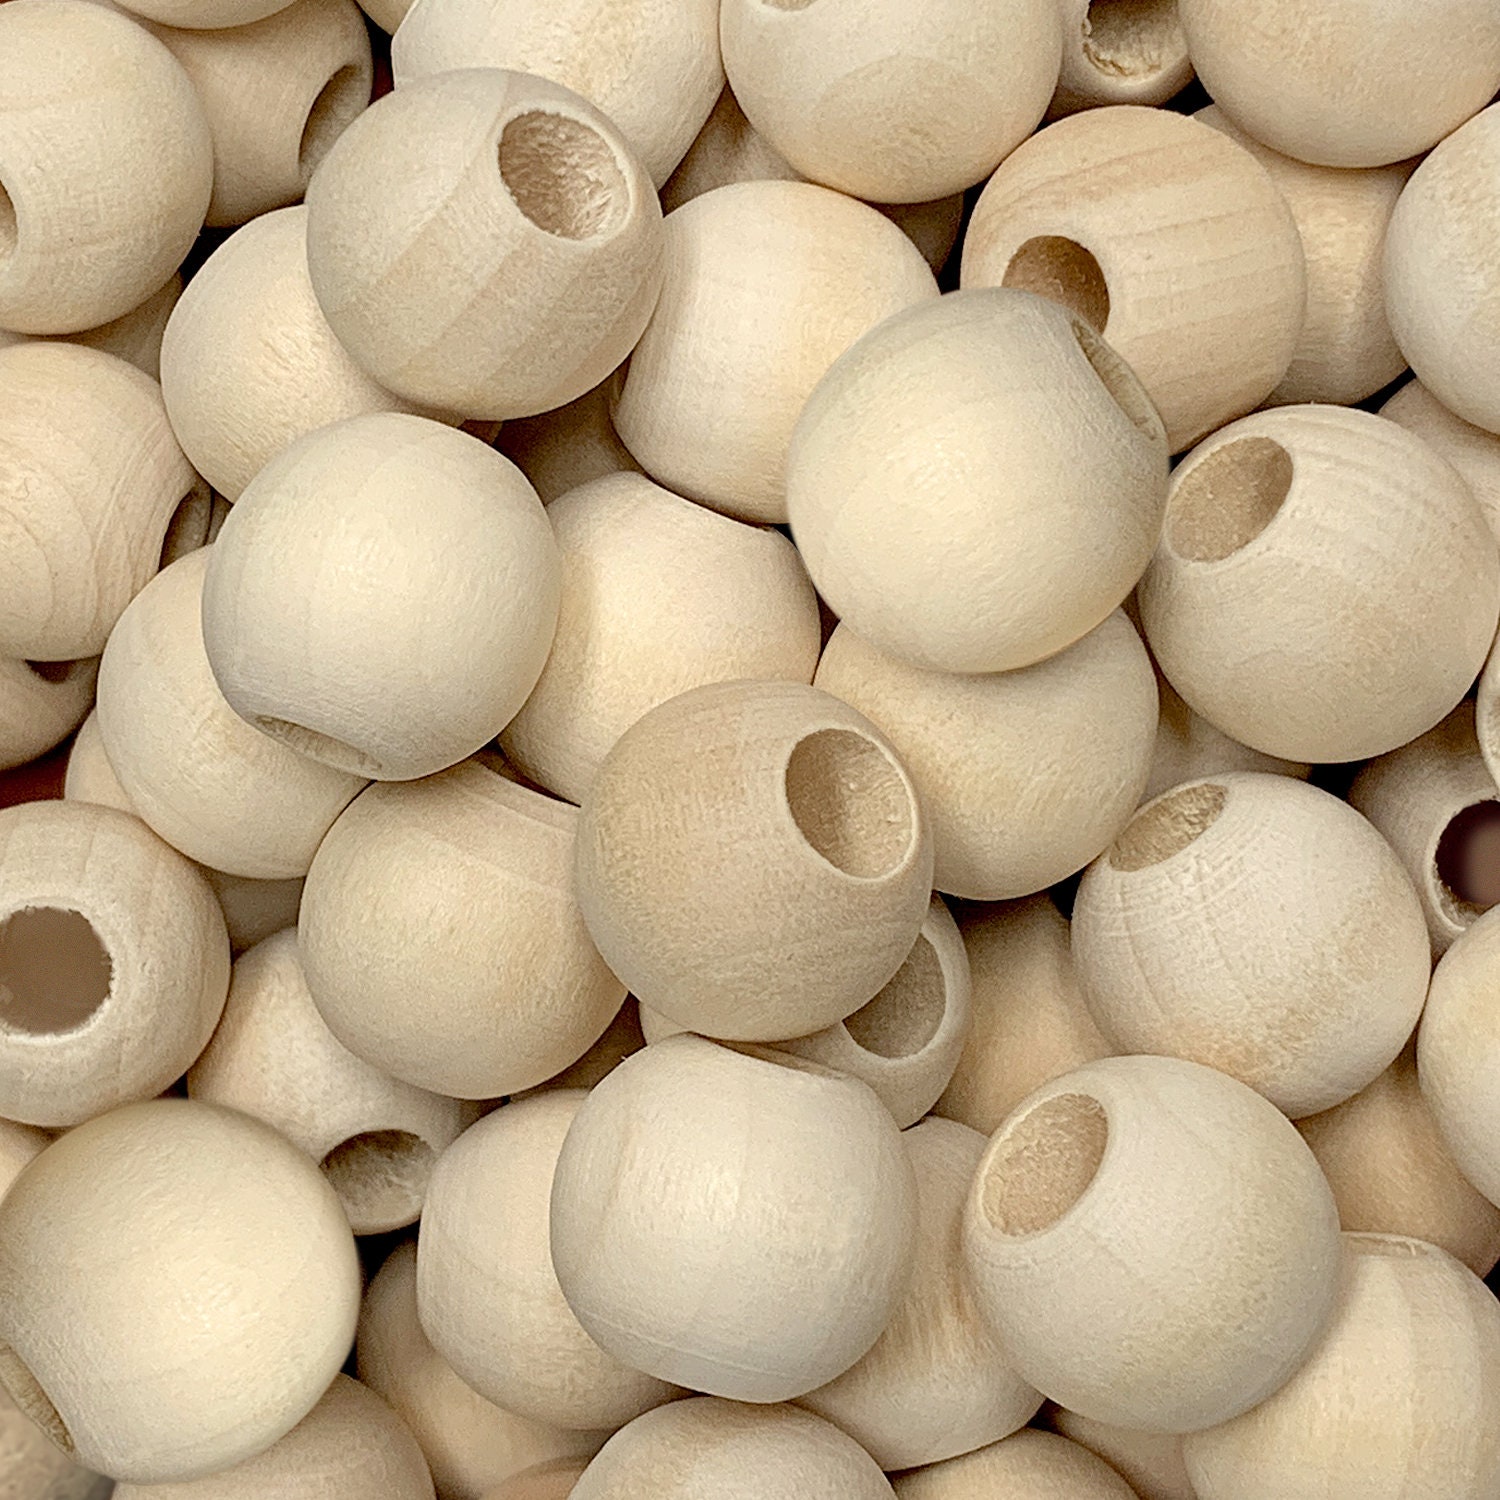 Natural Wood Large Hole Wooden Beads for Macrame European Crafts NEW Deco.  Q7I4 